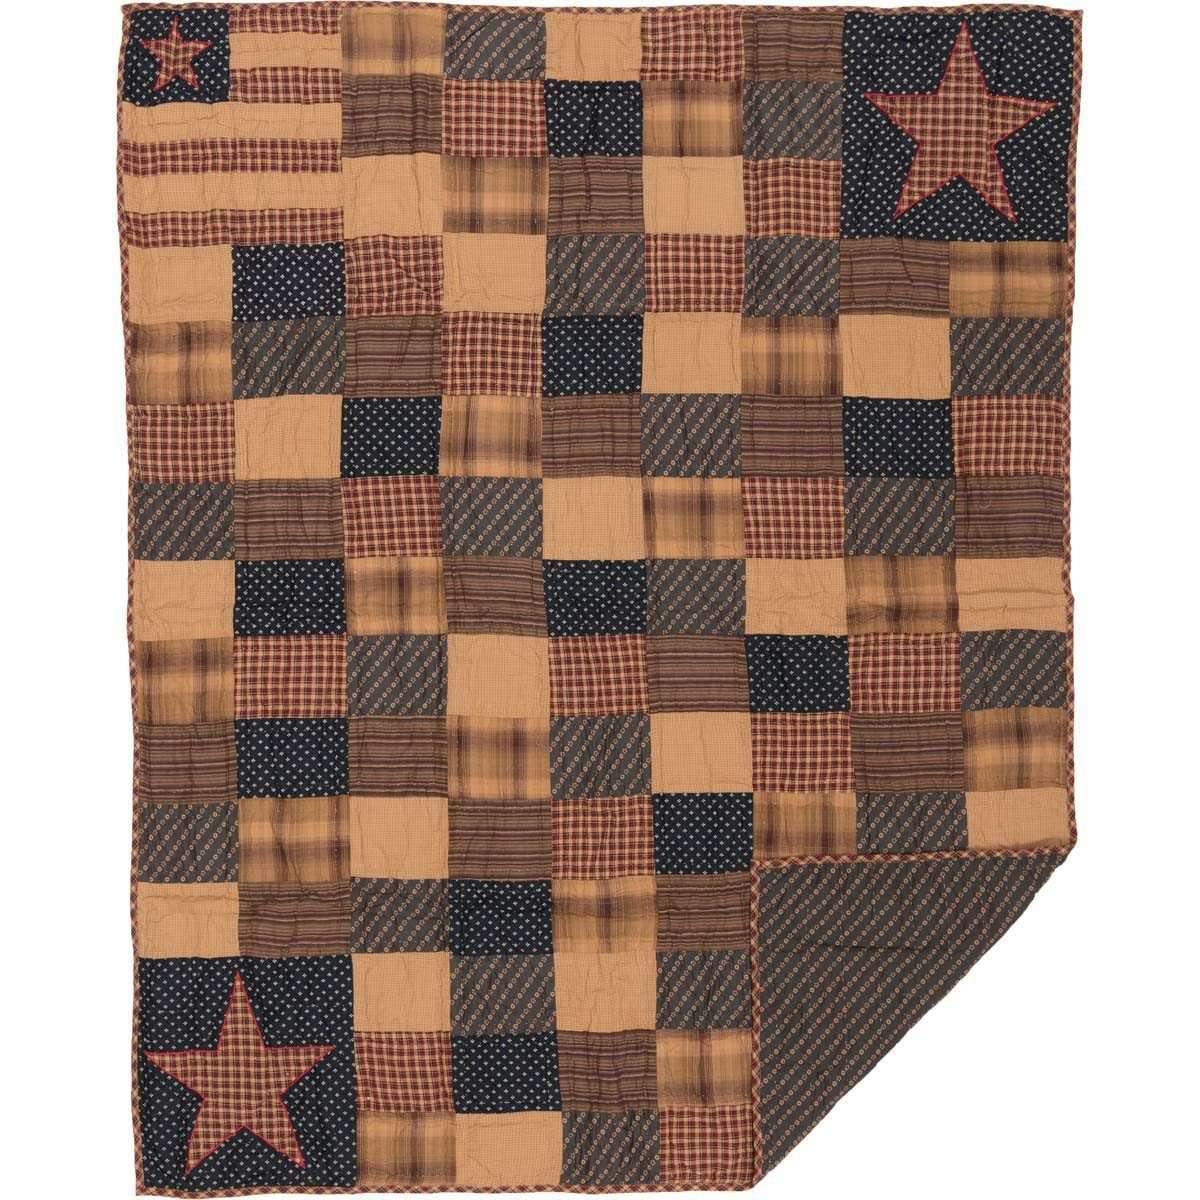 Patriotic Patch Quilted Throw 60x50 VHC Brands Online